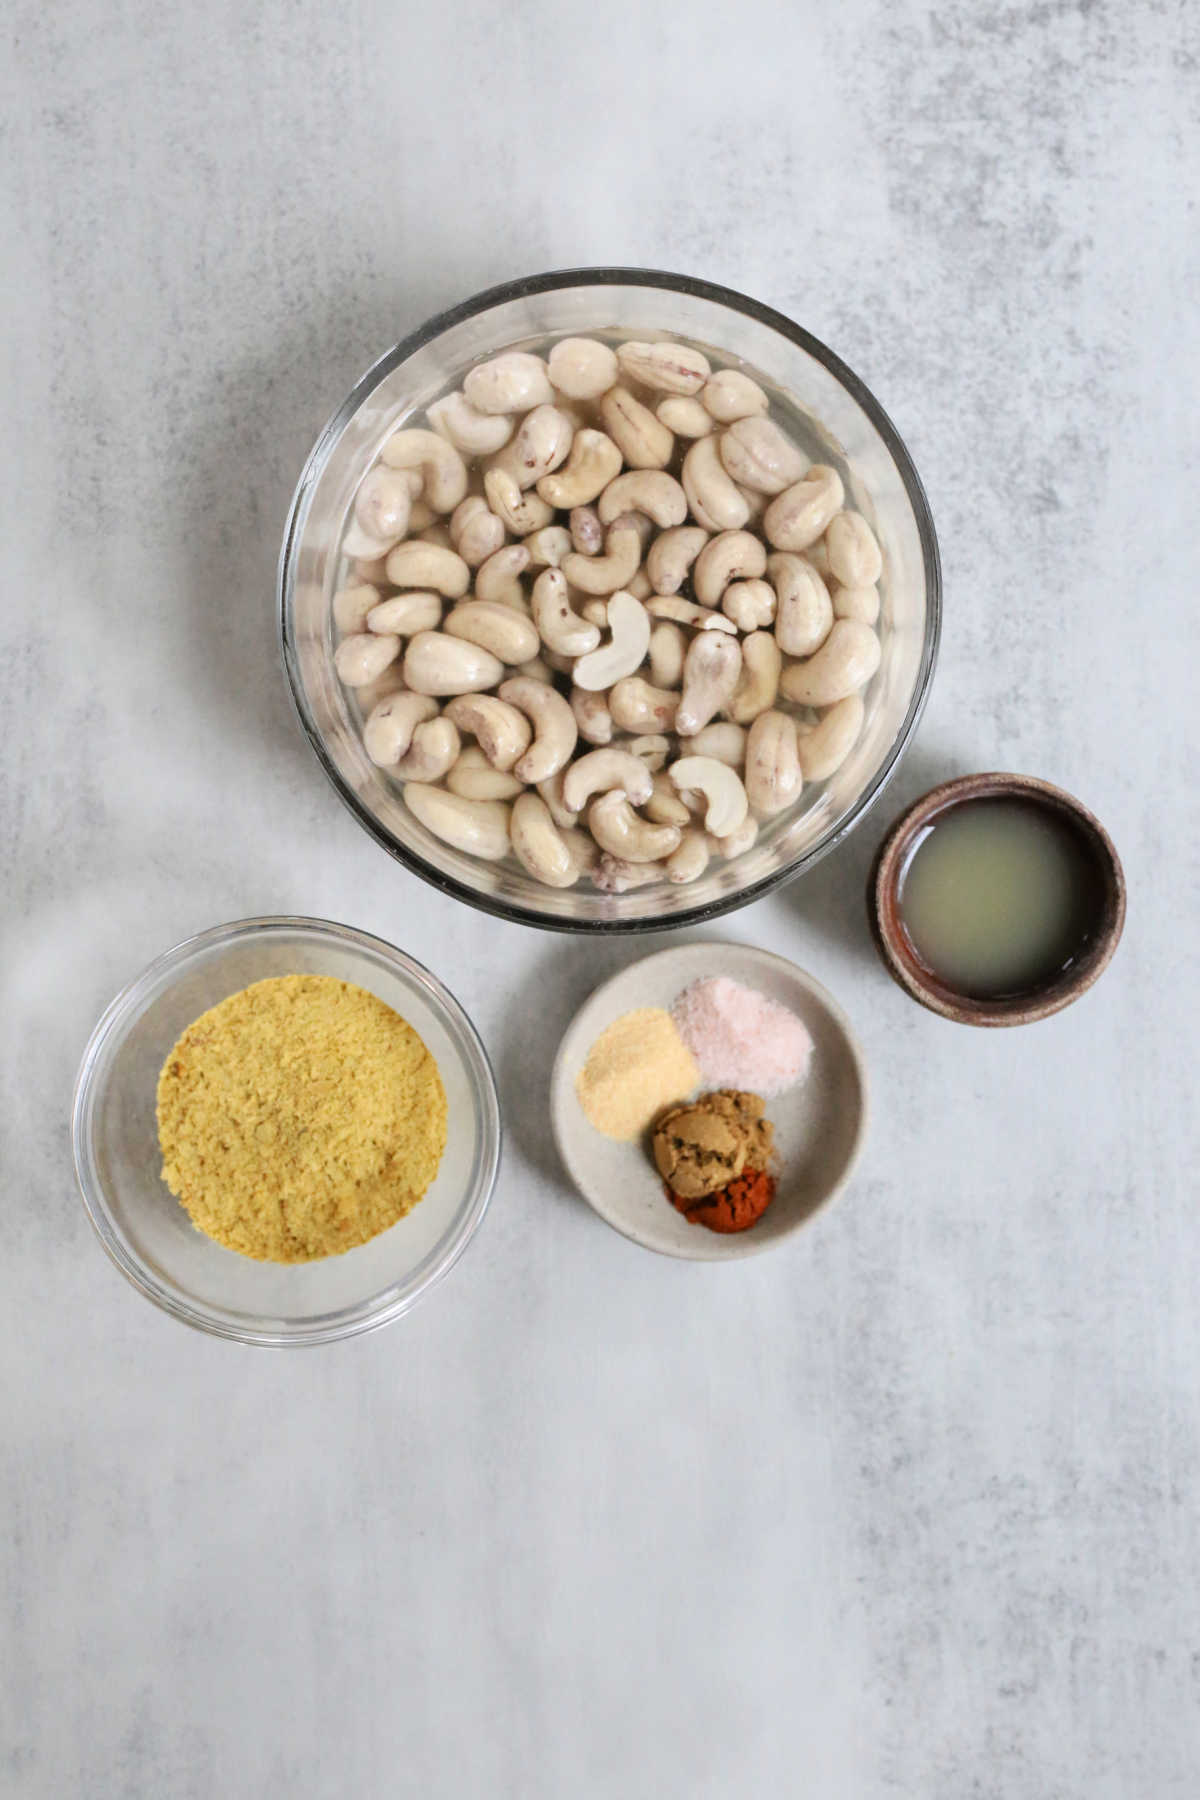 Ingredients to make Cashew Cheese